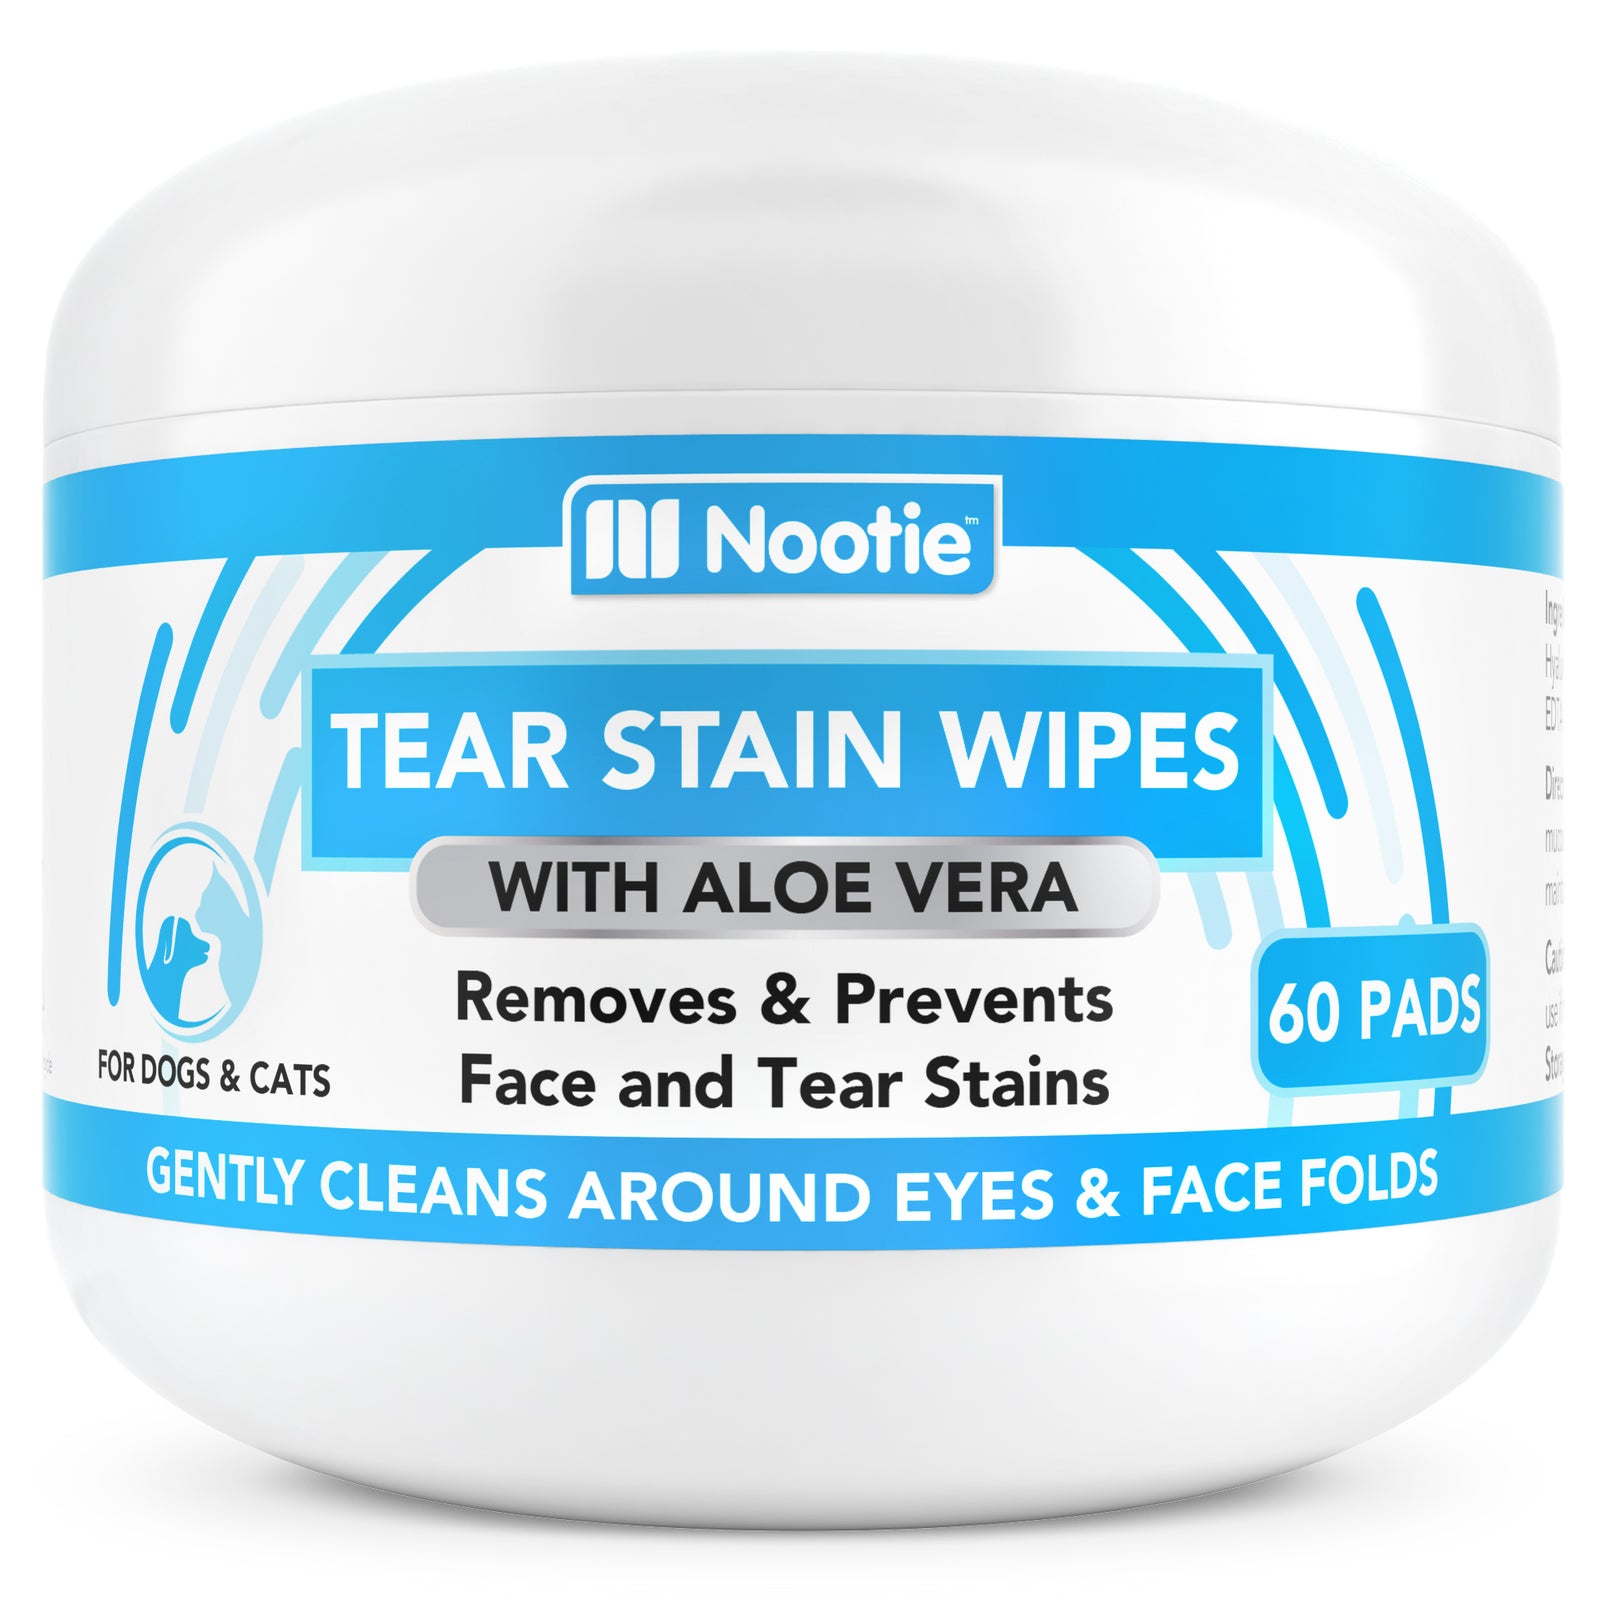 Tear Stain Wipes for Dogs & Cats  | 60 Pads